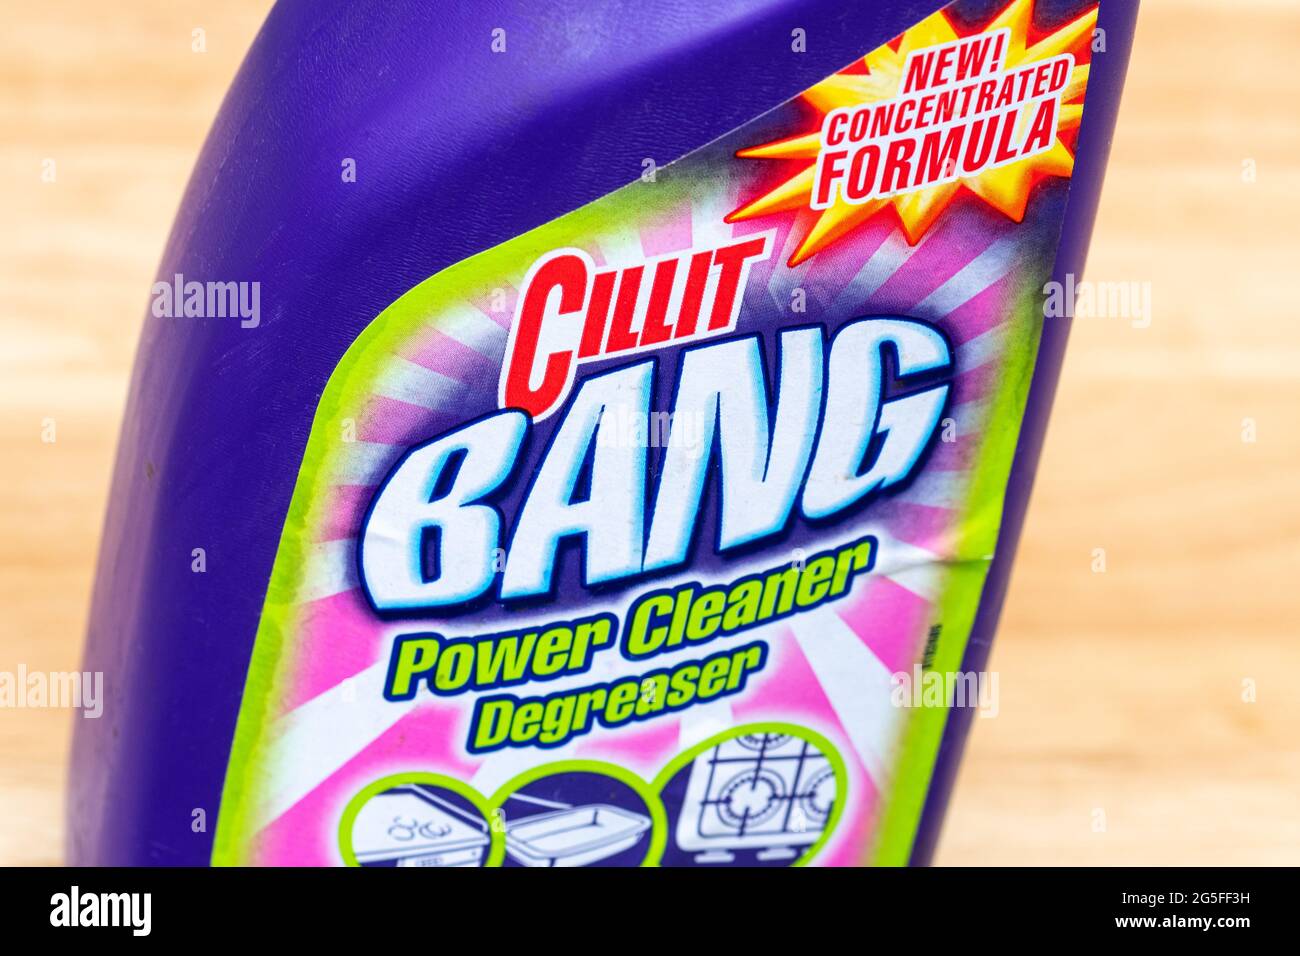 Bottle of Cillit Bang power cleaner degreaser, cleaning product Stock Photo